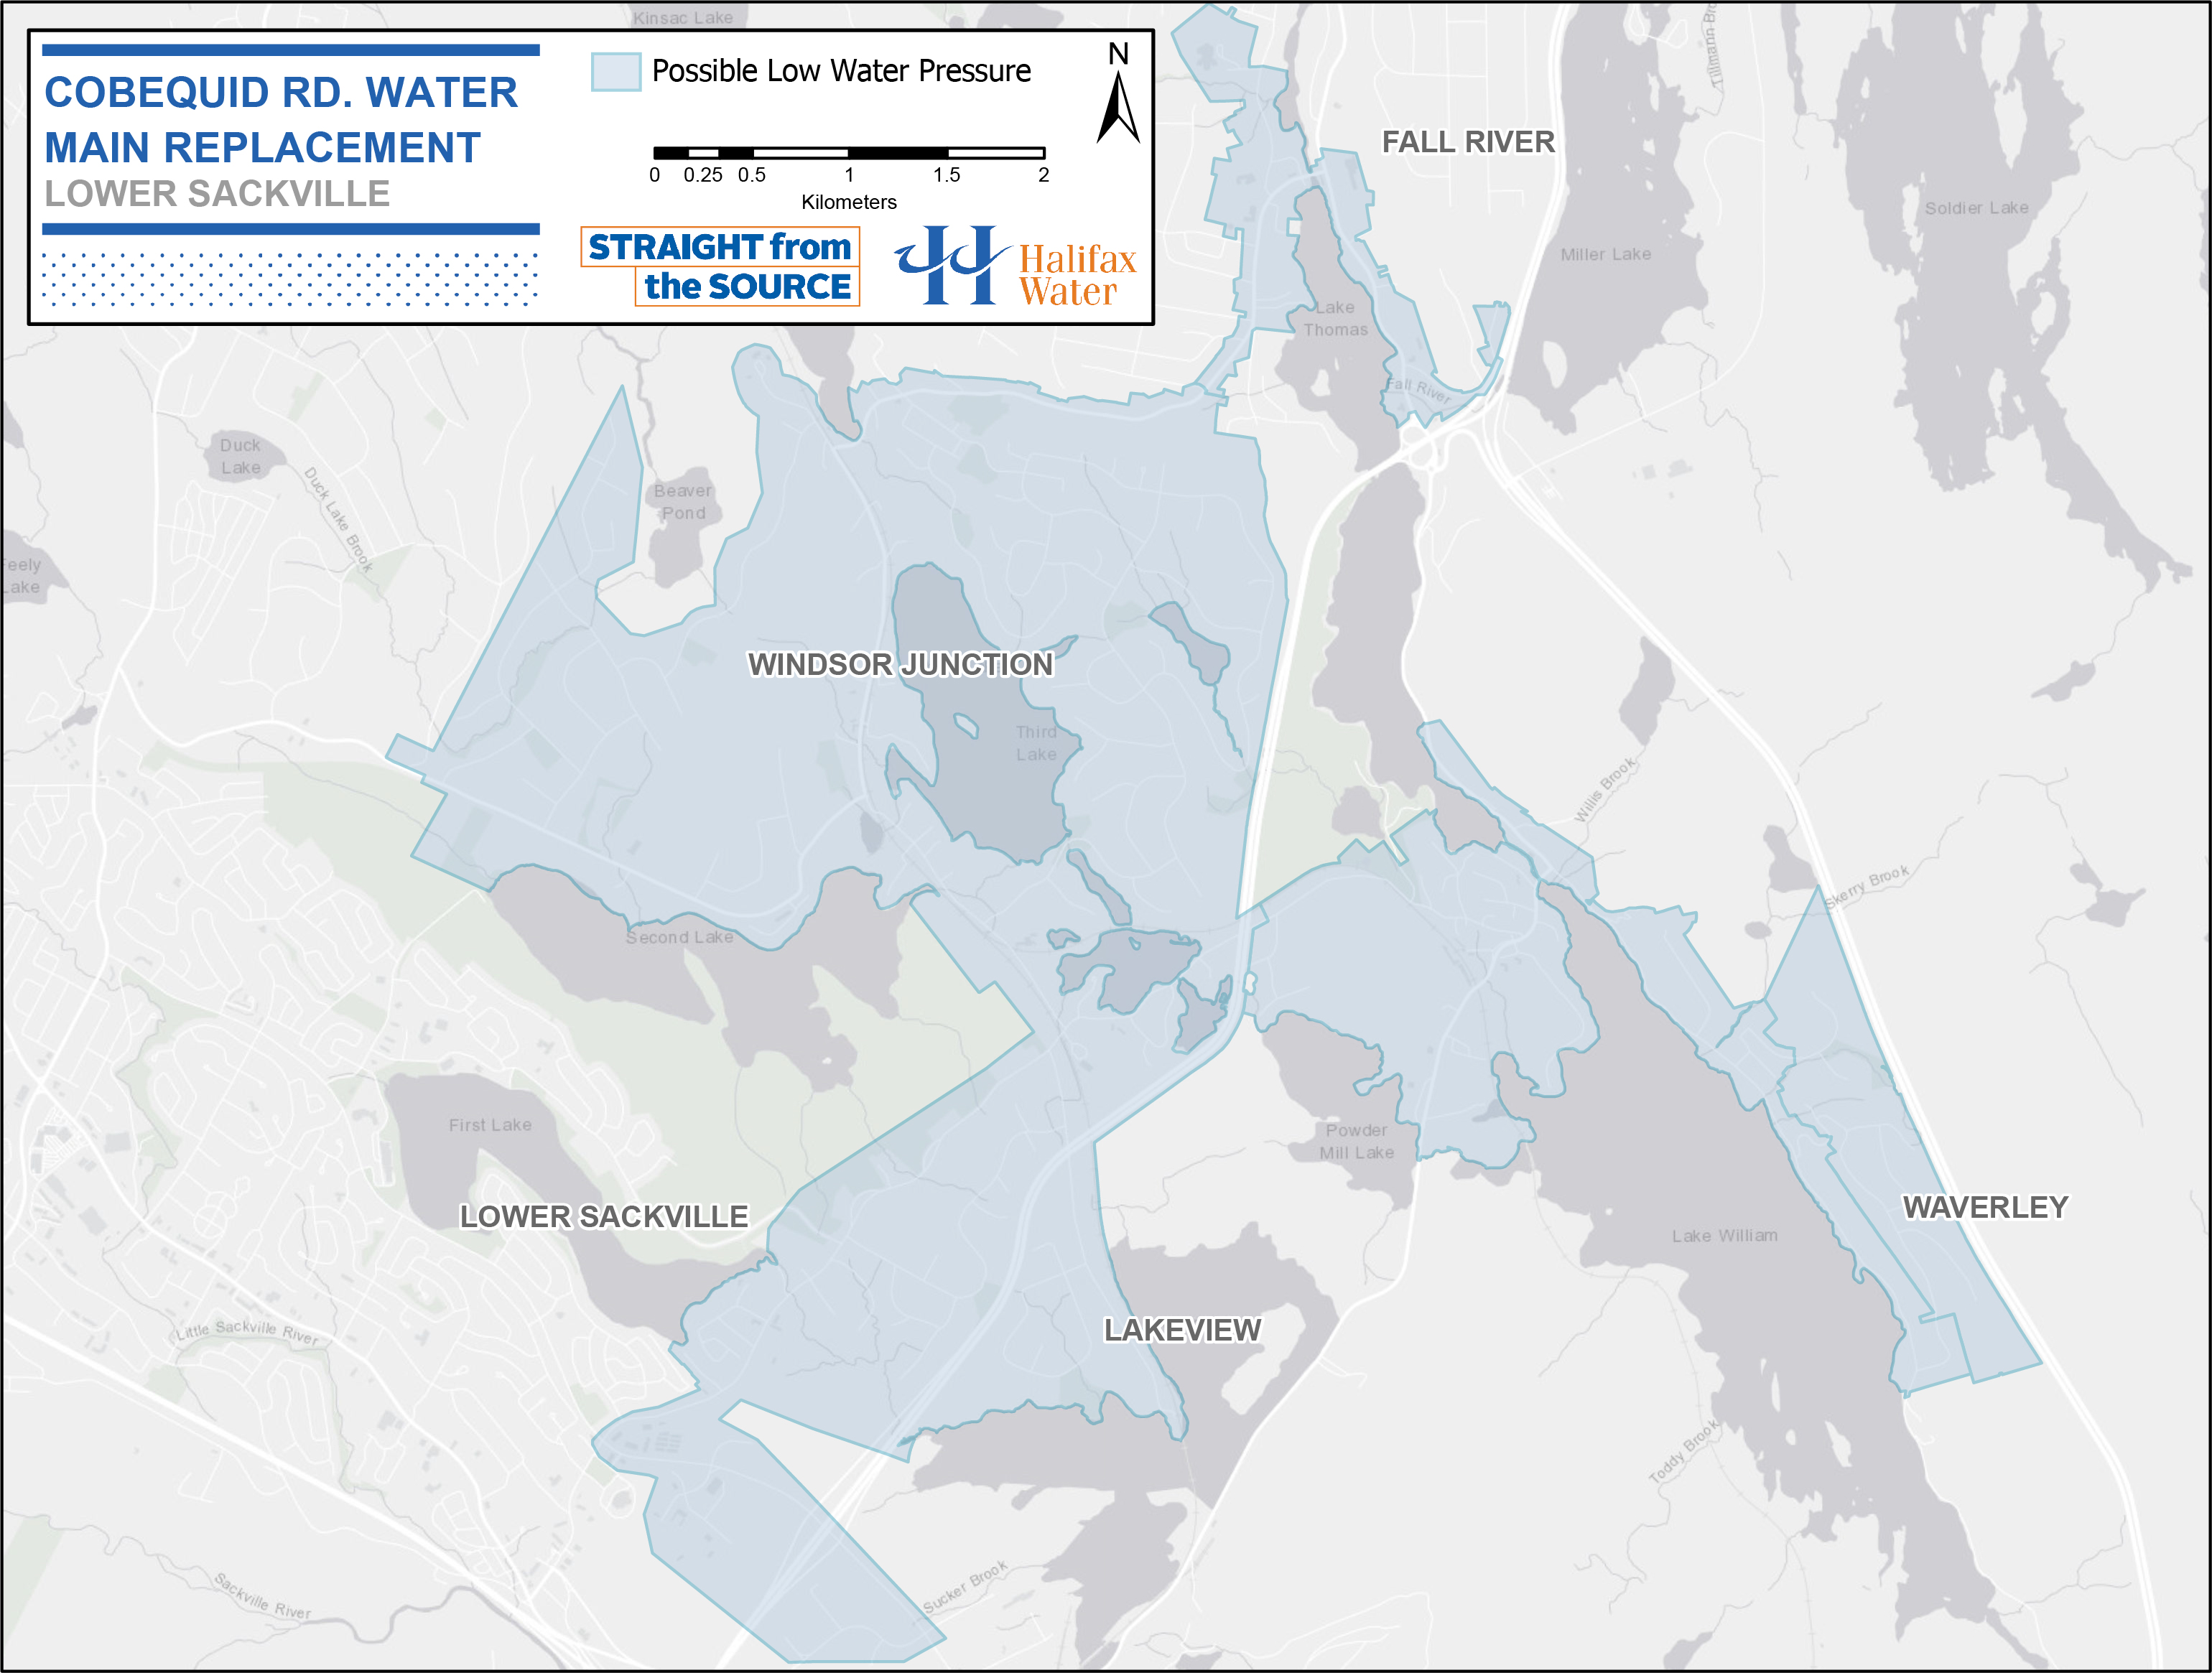 Cobequid Road Water Main Replacement - Possible Low Water Pressure Map